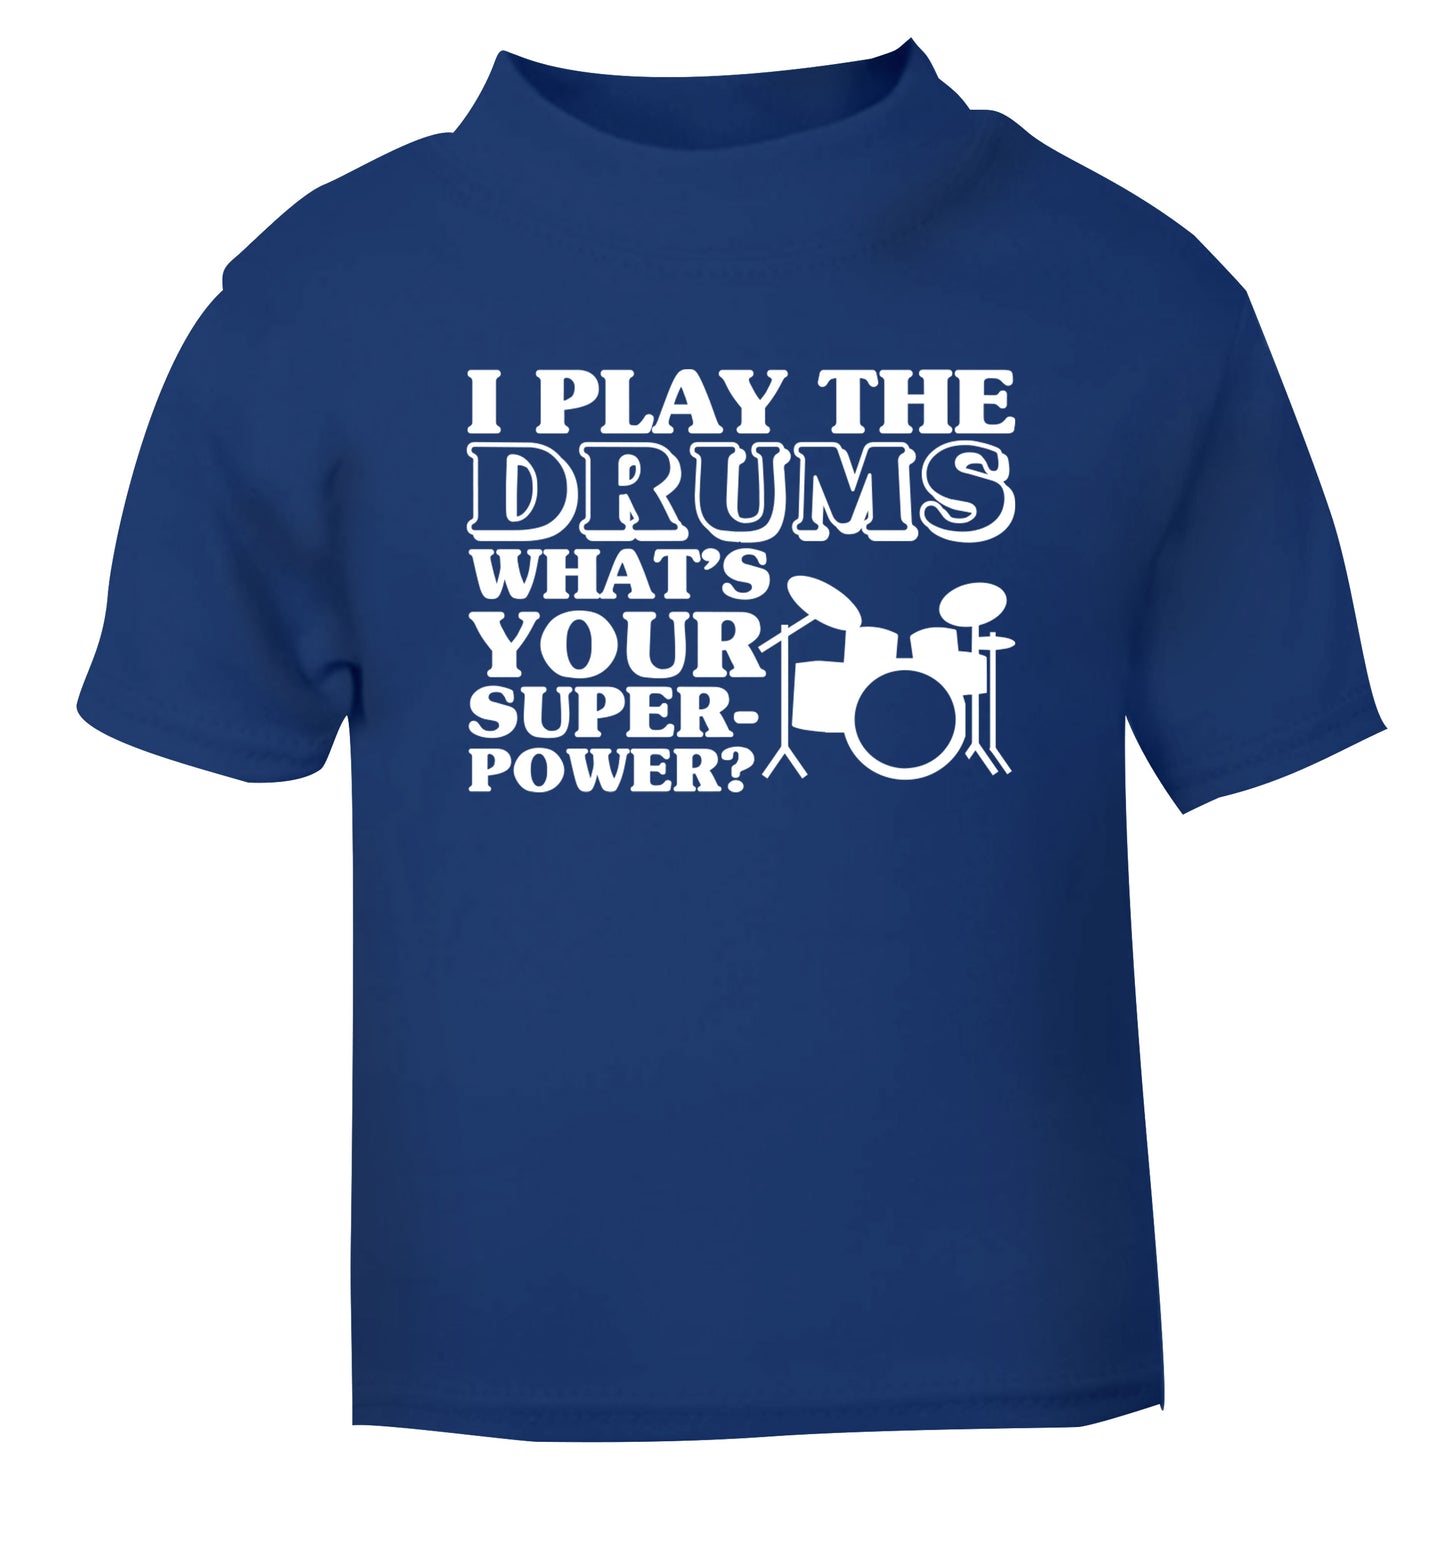 I play the drums what's your superpower? blue Baby Toddler Tshirt 2 Years